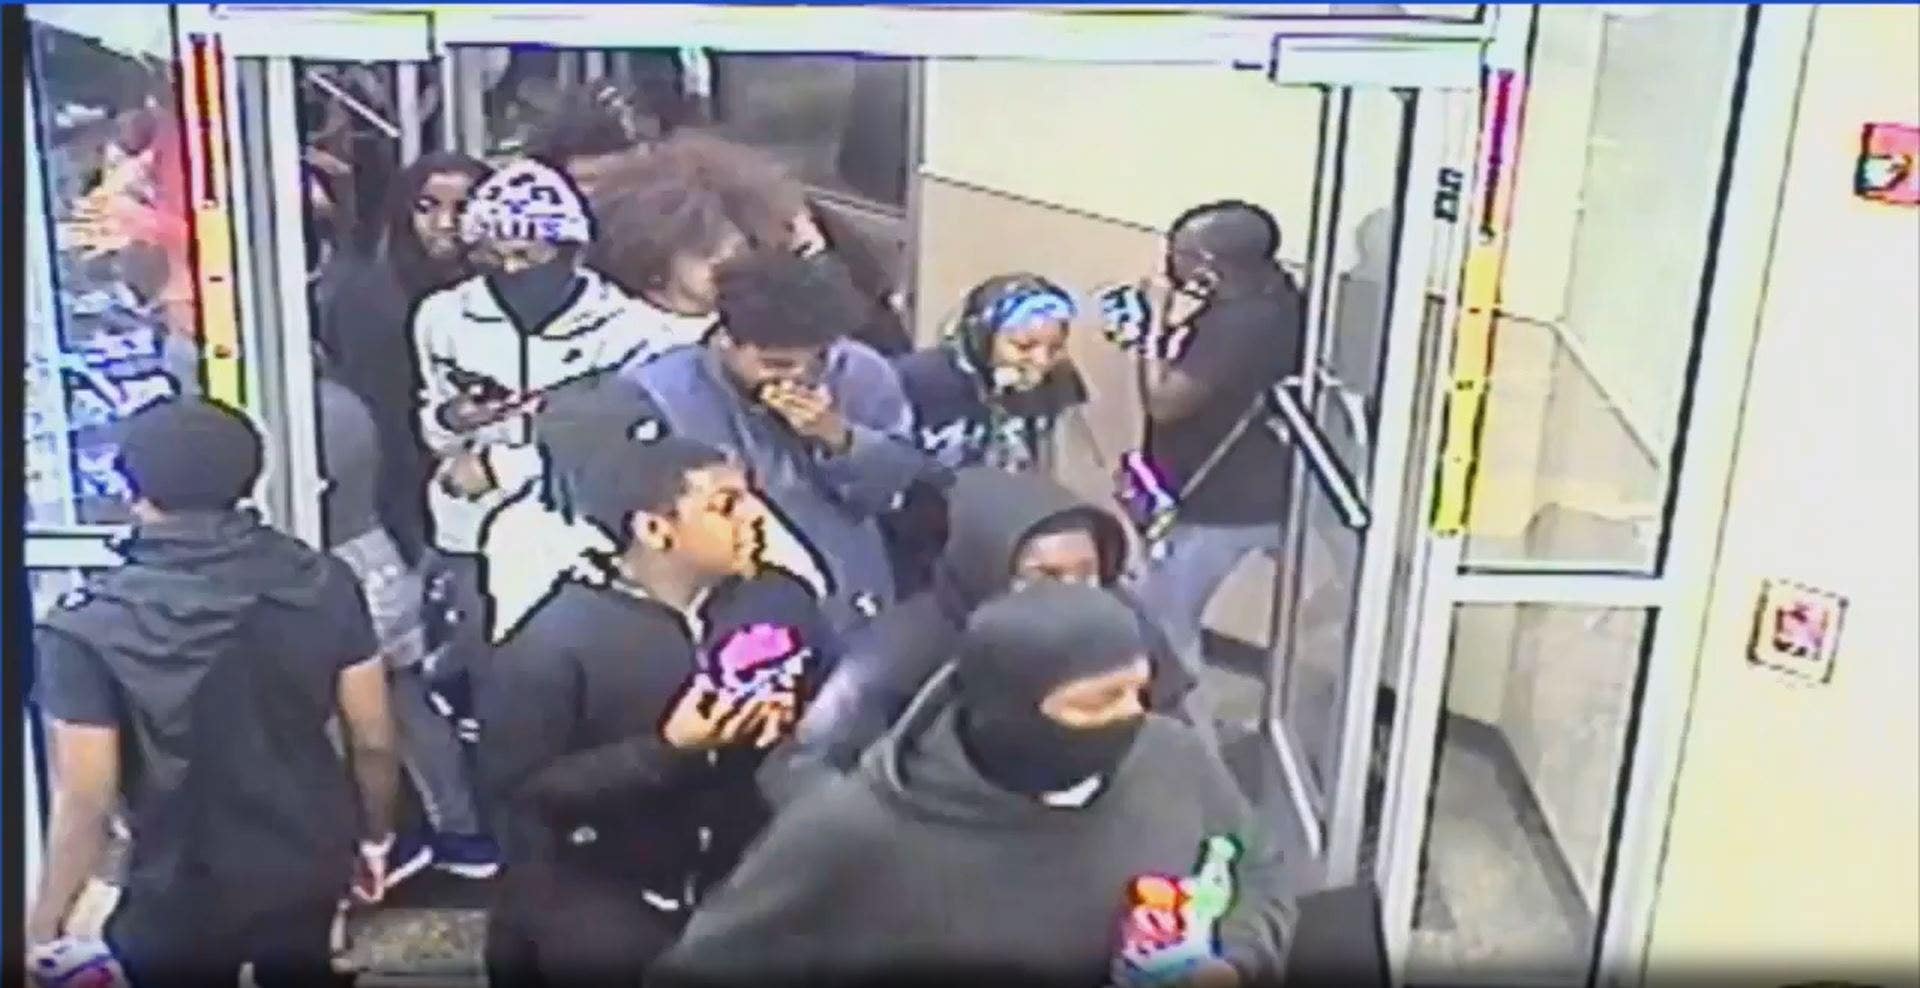 News :Philadelphia Wawa mob: Police release new footage of ransacking, say ‘citizens don’t deserve it’